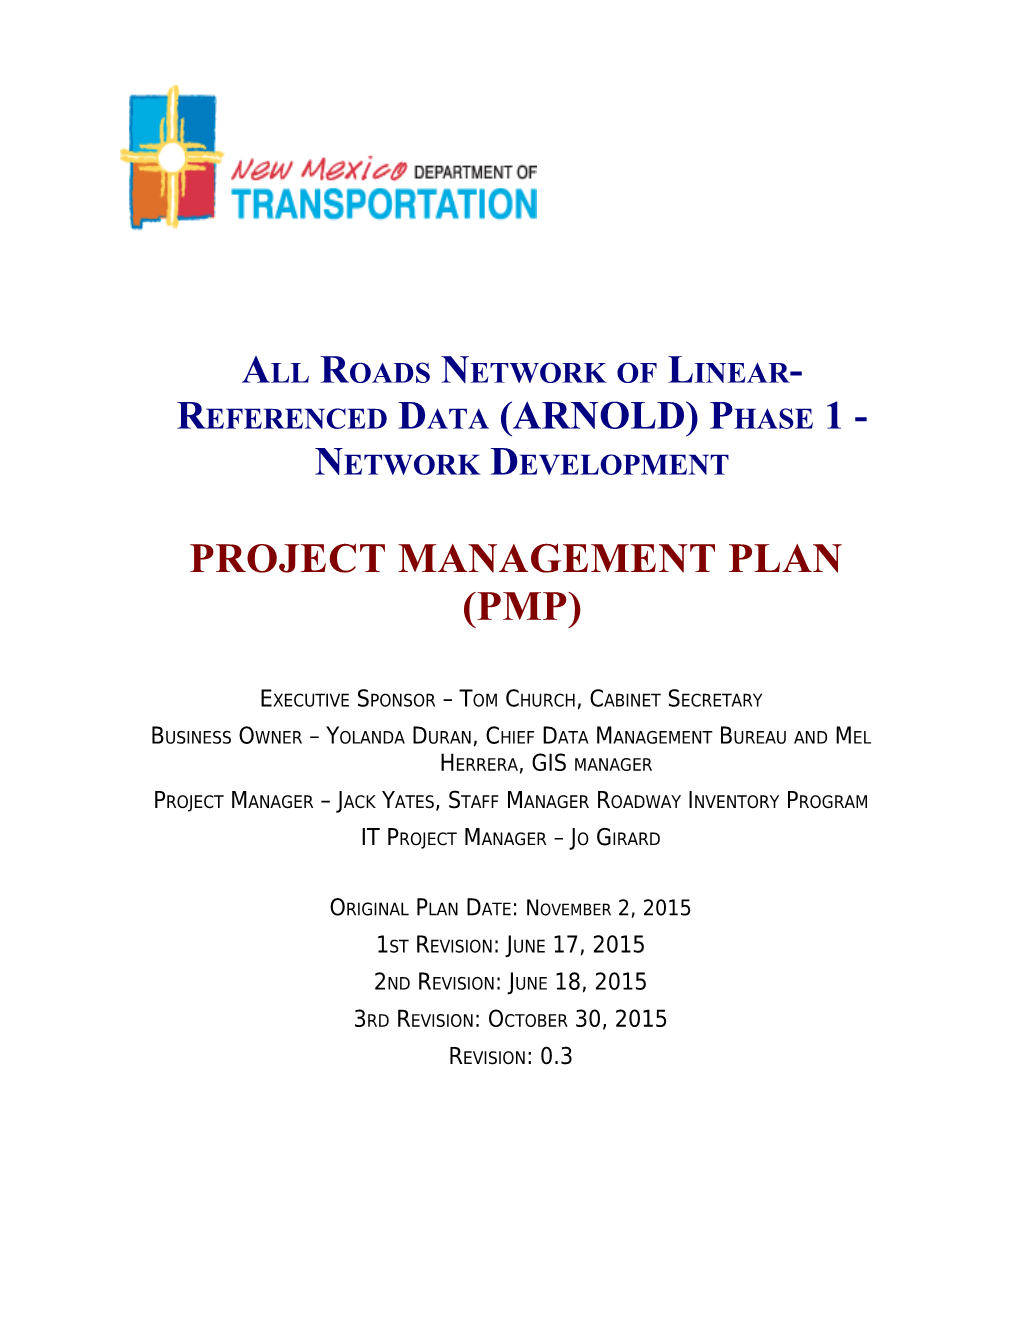 All Roads Network of Linear-Referenced Data (ARNOLD)Phase 1 - Network Development